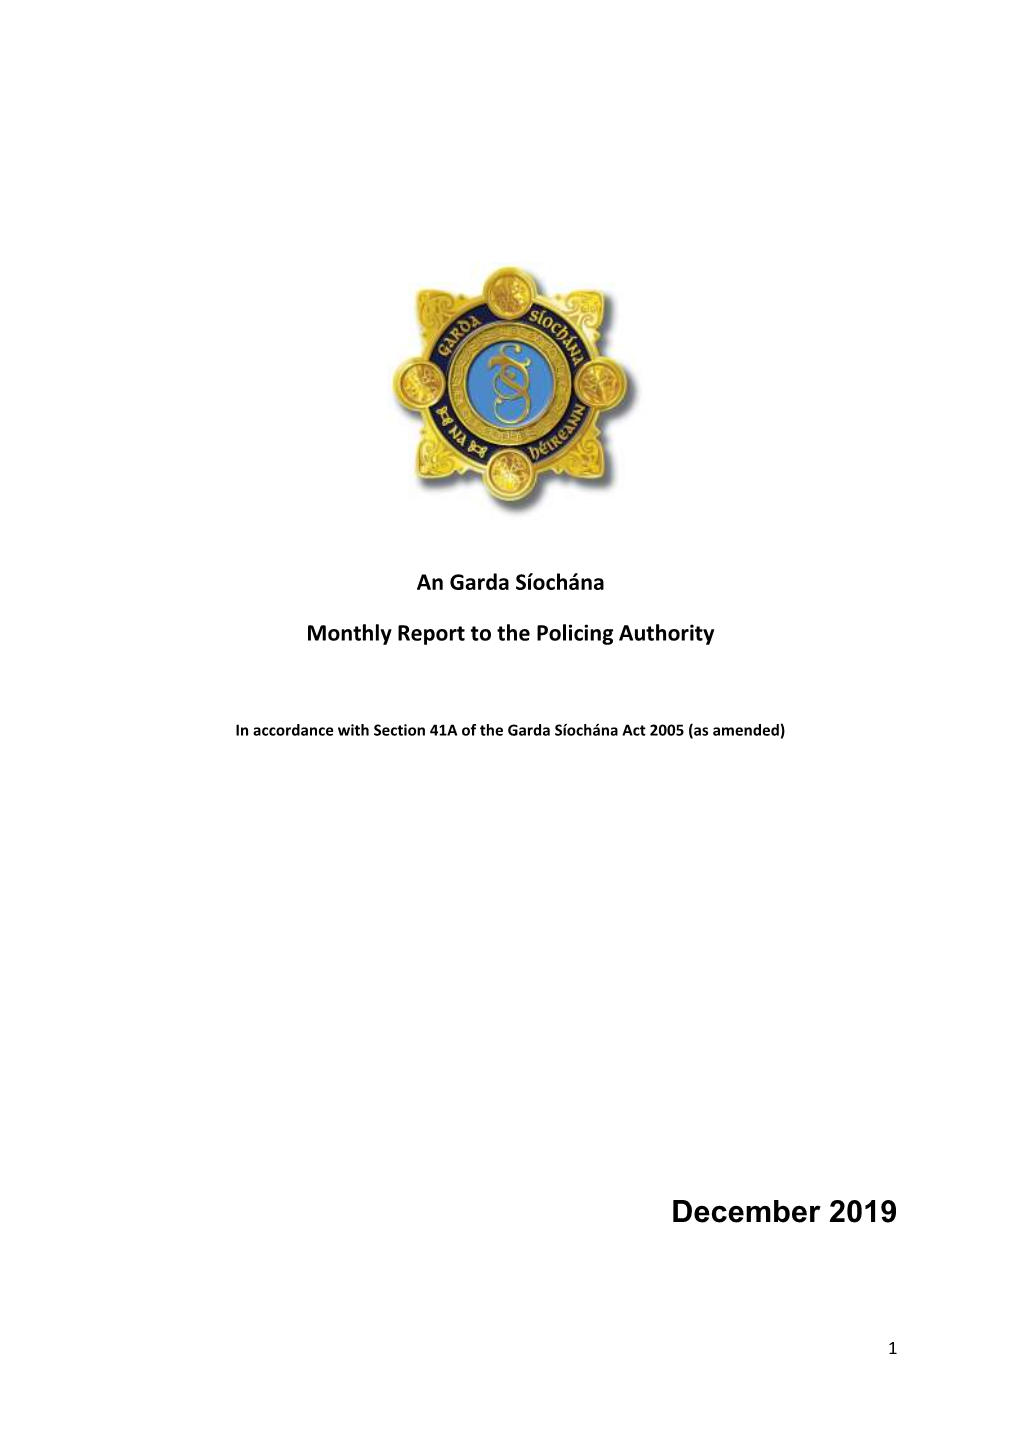 Commissioner's Monthly Report December 2019